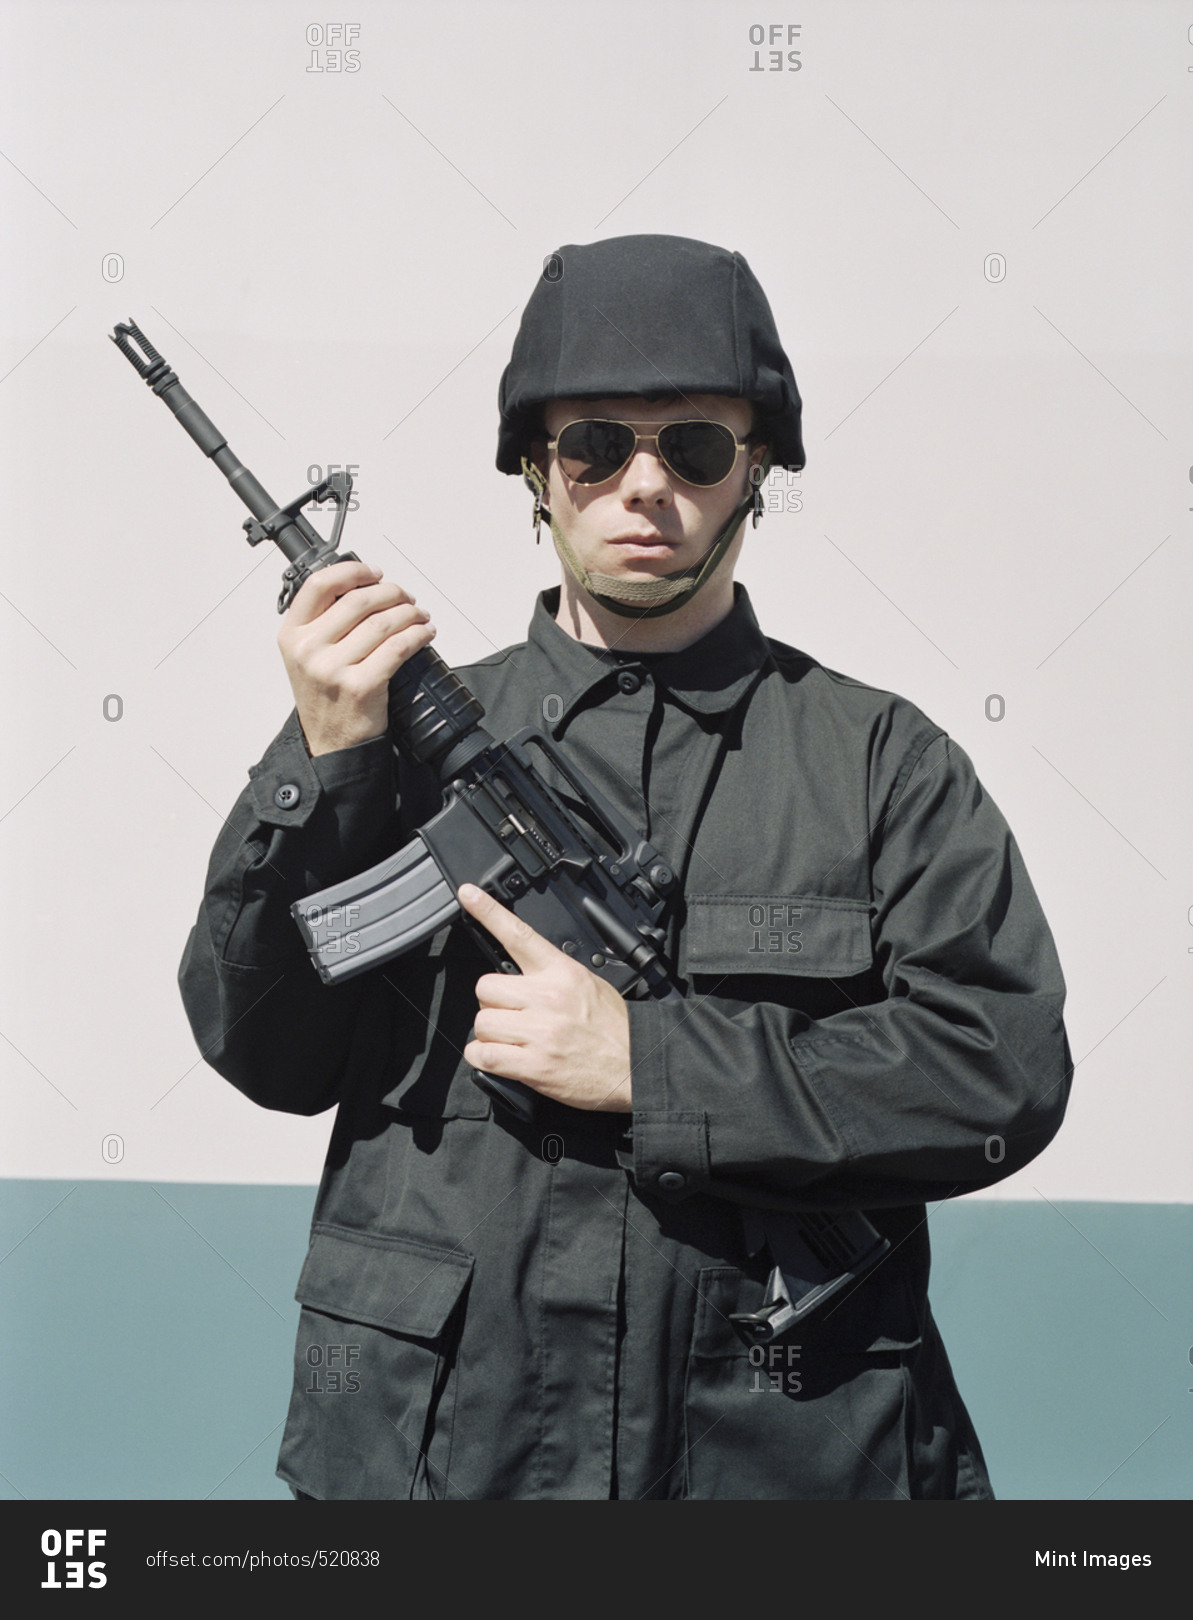 Man wearing special forces uniform and holding high powered semi-automatic rifle